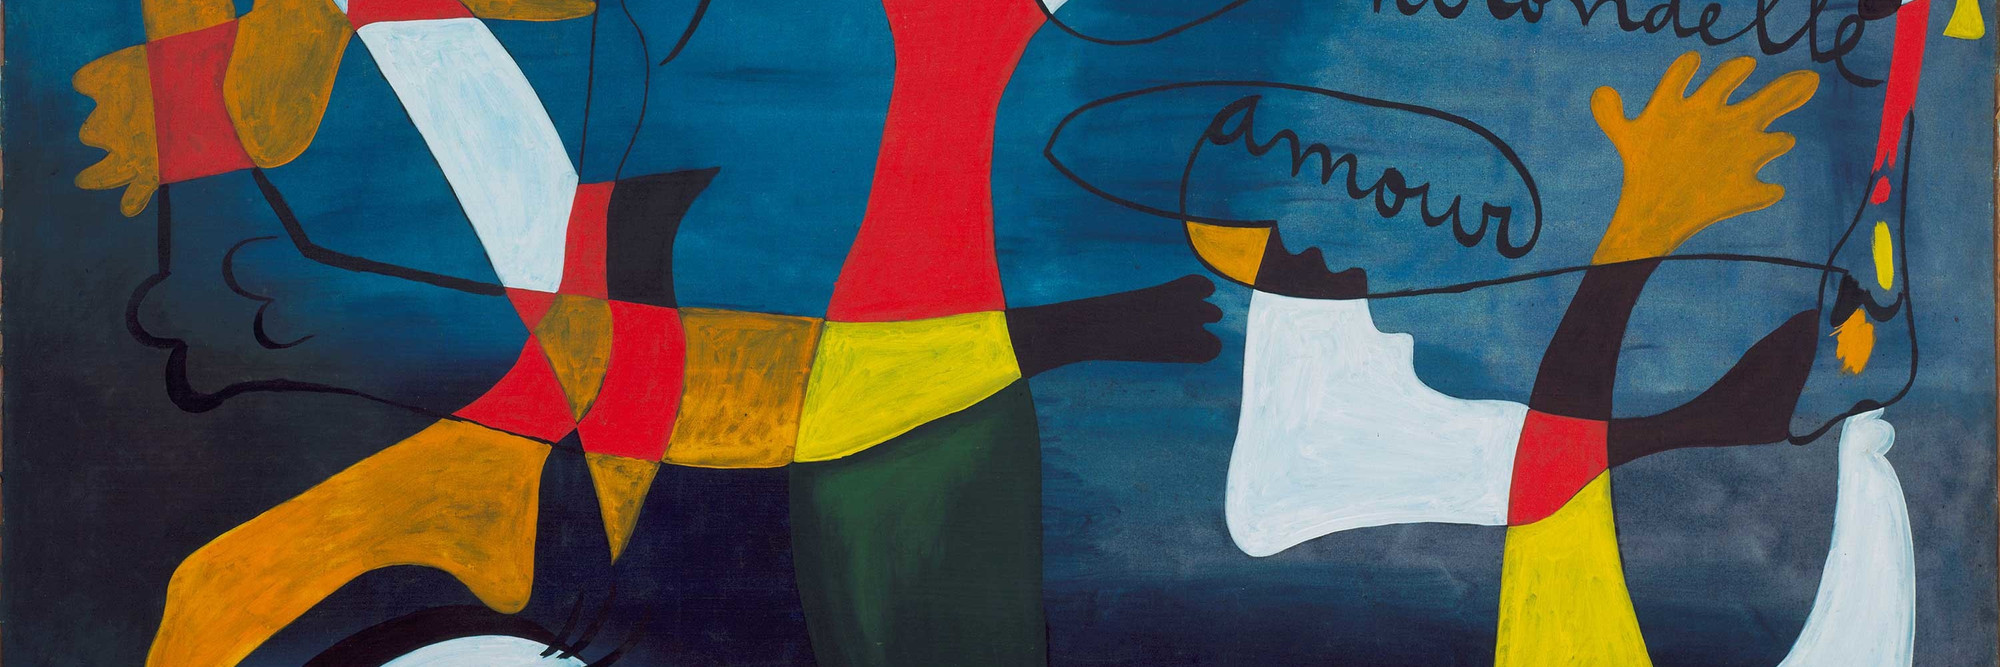 Joan Miró. “Hirondelle Amour”. 1933–34. Oil on canvas, 6&#39; 6 1/2&#34; x 8&#39; 1 1/2&#34; (199.3 x 247.6 cm). Gift of Nelson A. Rockefeller. © 2018 Successió Miró/Artists Rights Society (ARS), New York/ADAGP, Paris